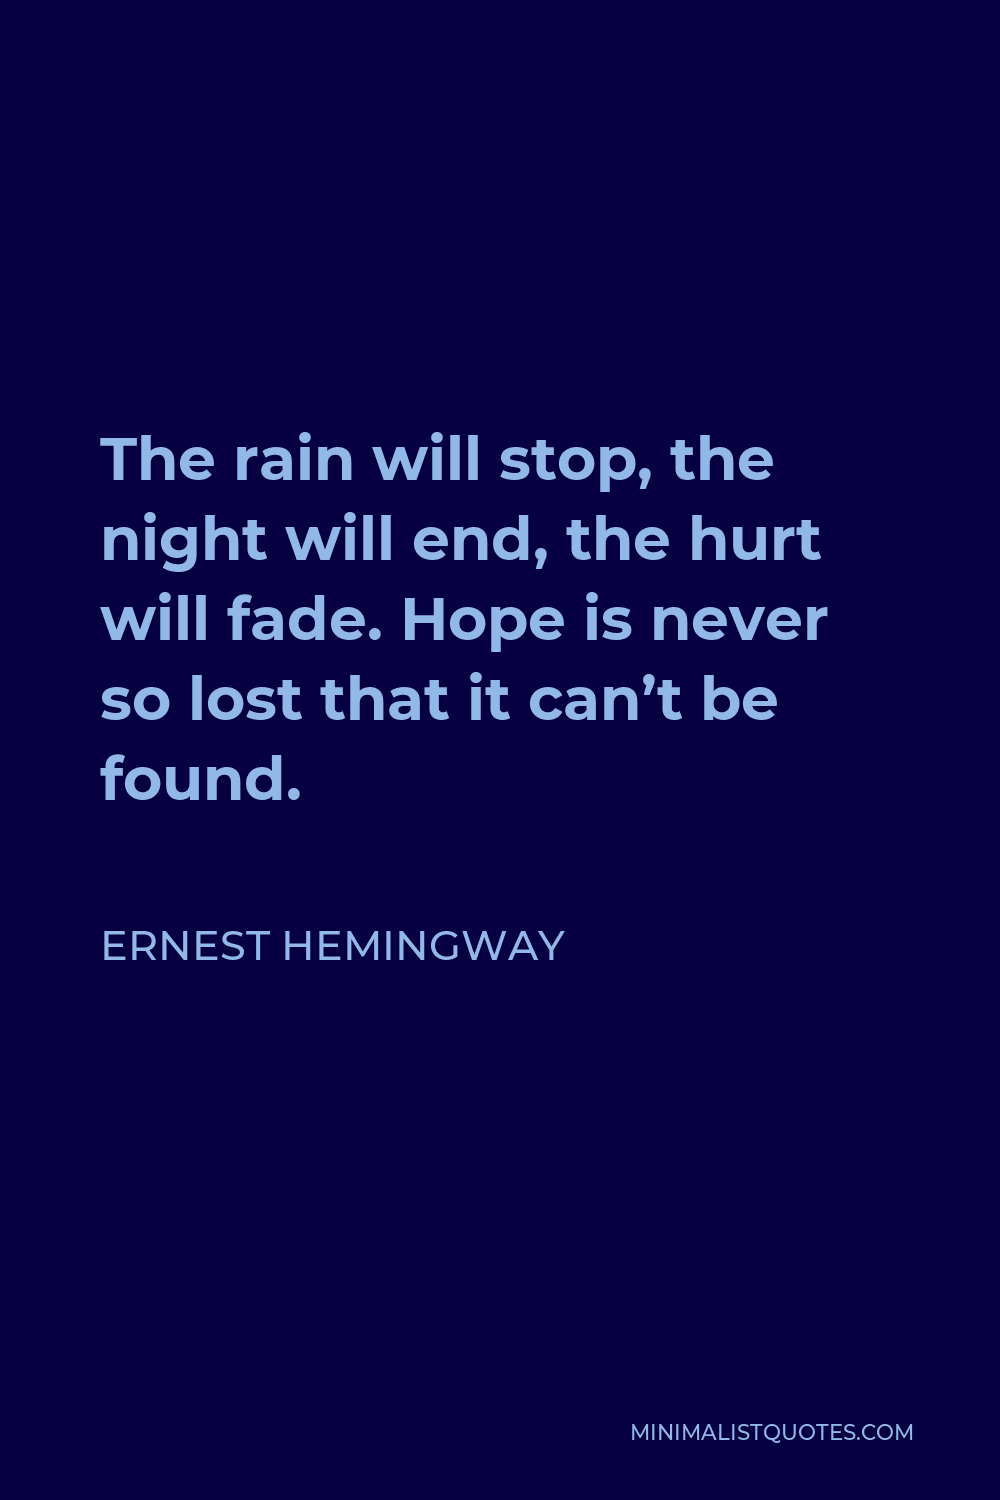 Ernest Hemingway Quote: The rain will stop, the night will end, the ...